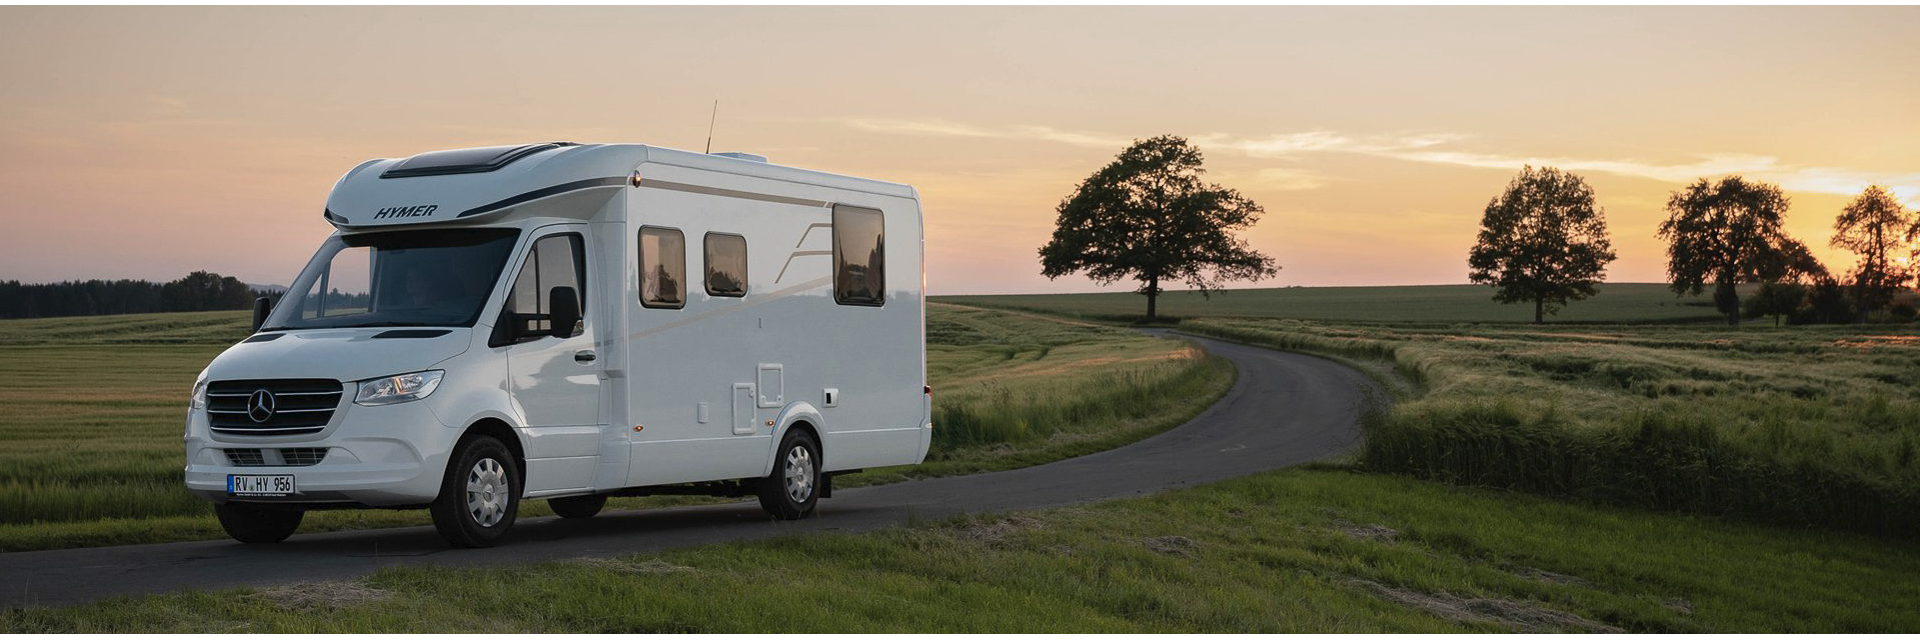 Hymer bei rent easy